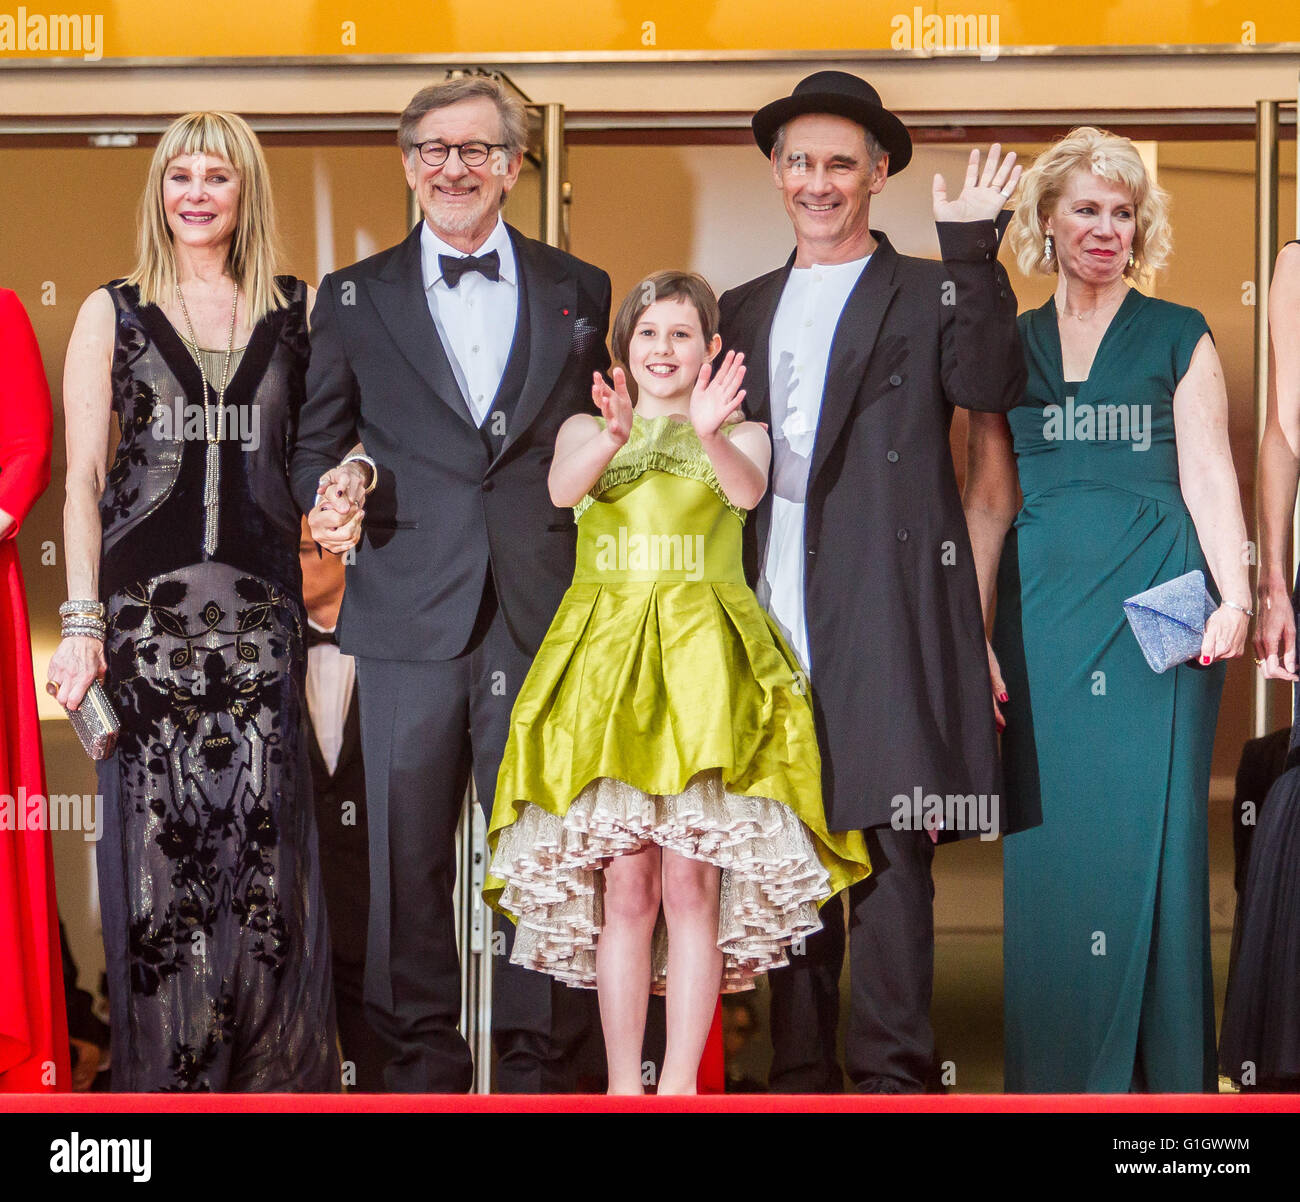 STEVEN SPIELBERG, KATE CAPSHAW, RUBY BARNHILL, MARK RYLANCE  ACTORS AND DIRECTOR  THE BFG. PREMIERE 69TH CANNES FILM FESTIVAL  CANNES, , FRANCE  15 May 2016  DIW89328 Stock Photo